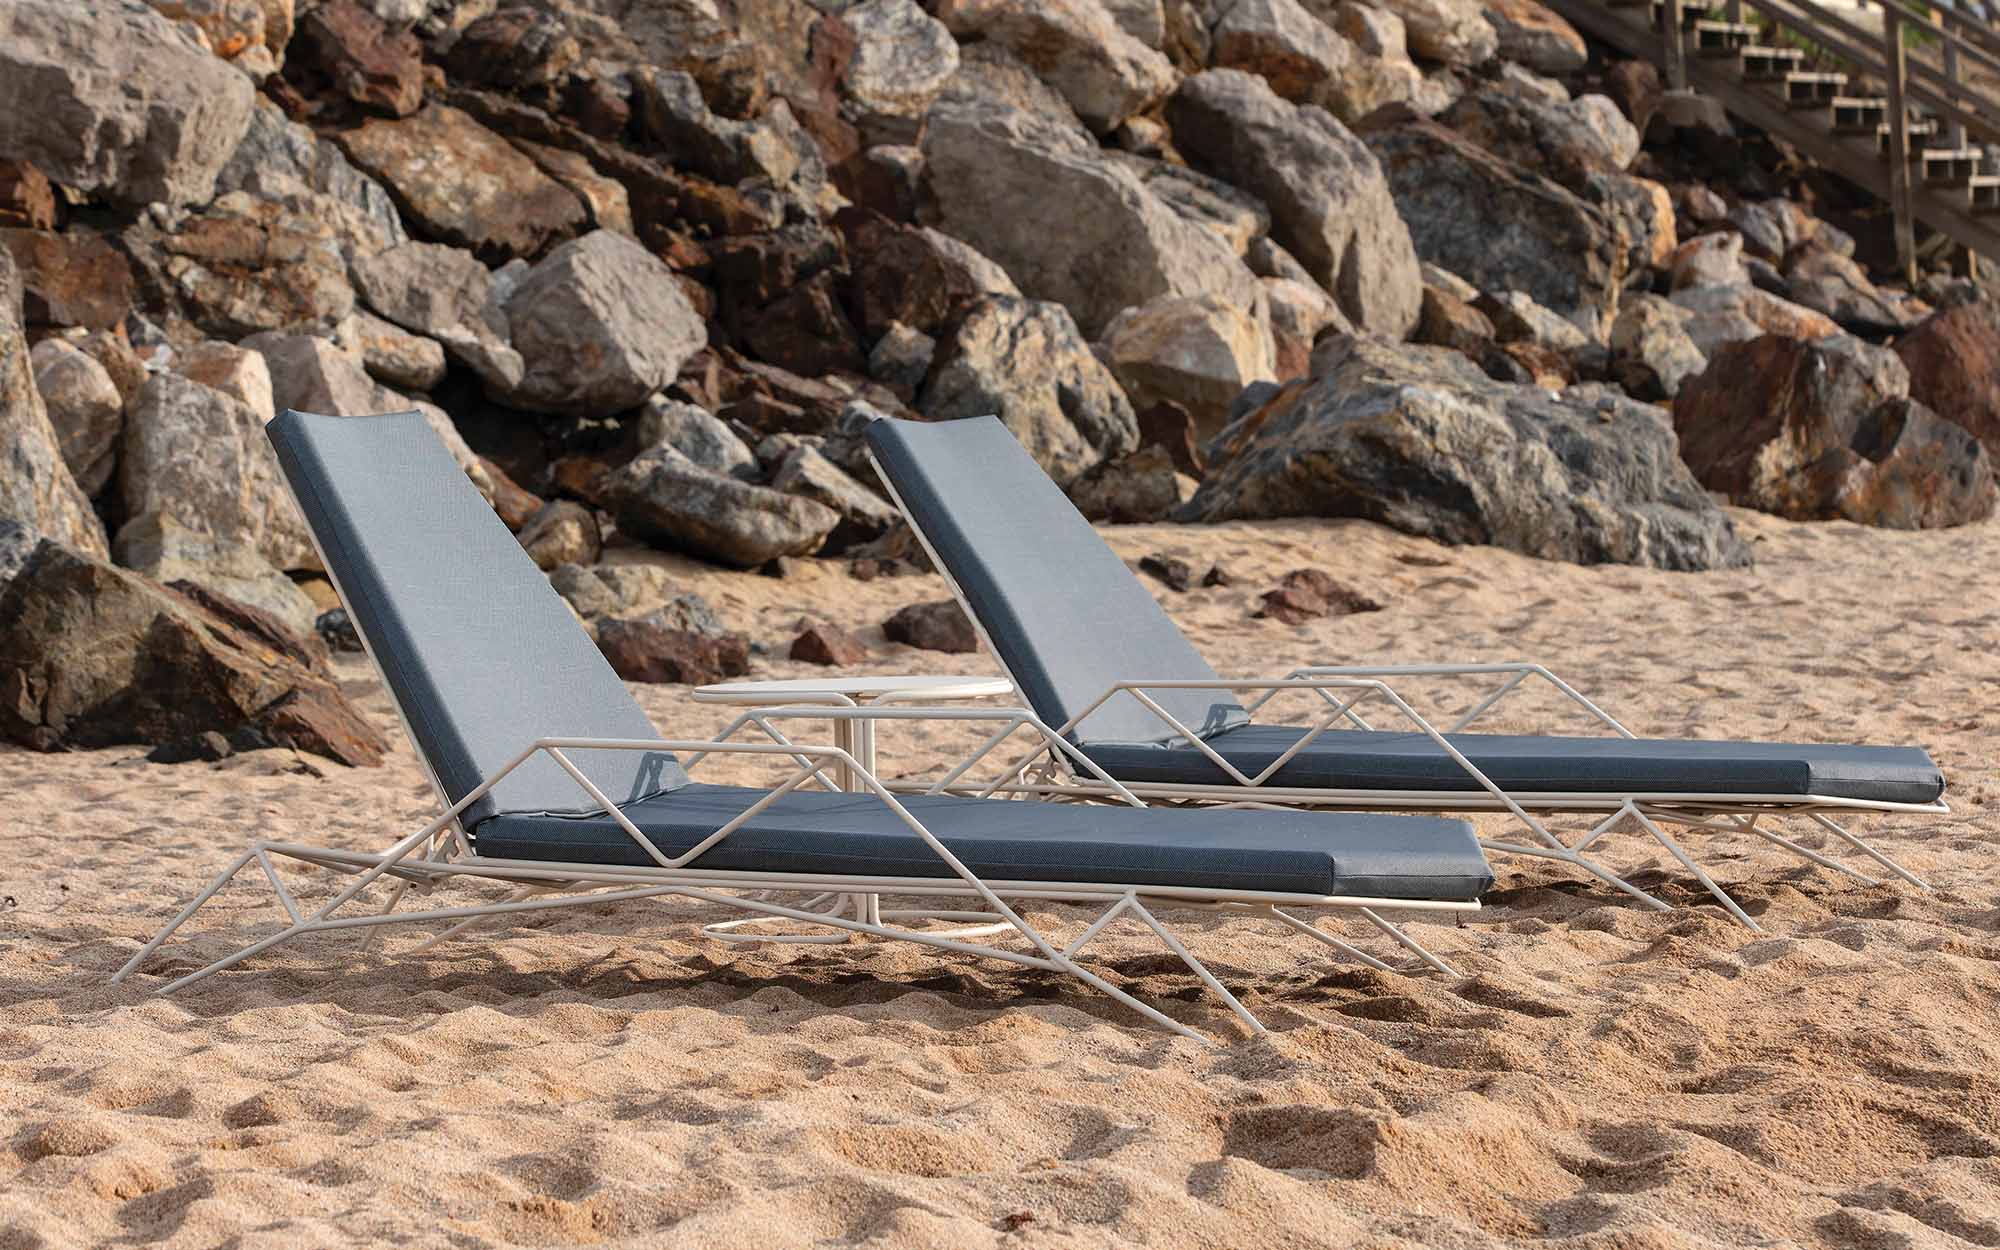 two lounge chairs resting on beach.
iSiMAR Mitjorn Sun lounger.
Designed by Ramón Esteve, 100 percent recycled and recyclable